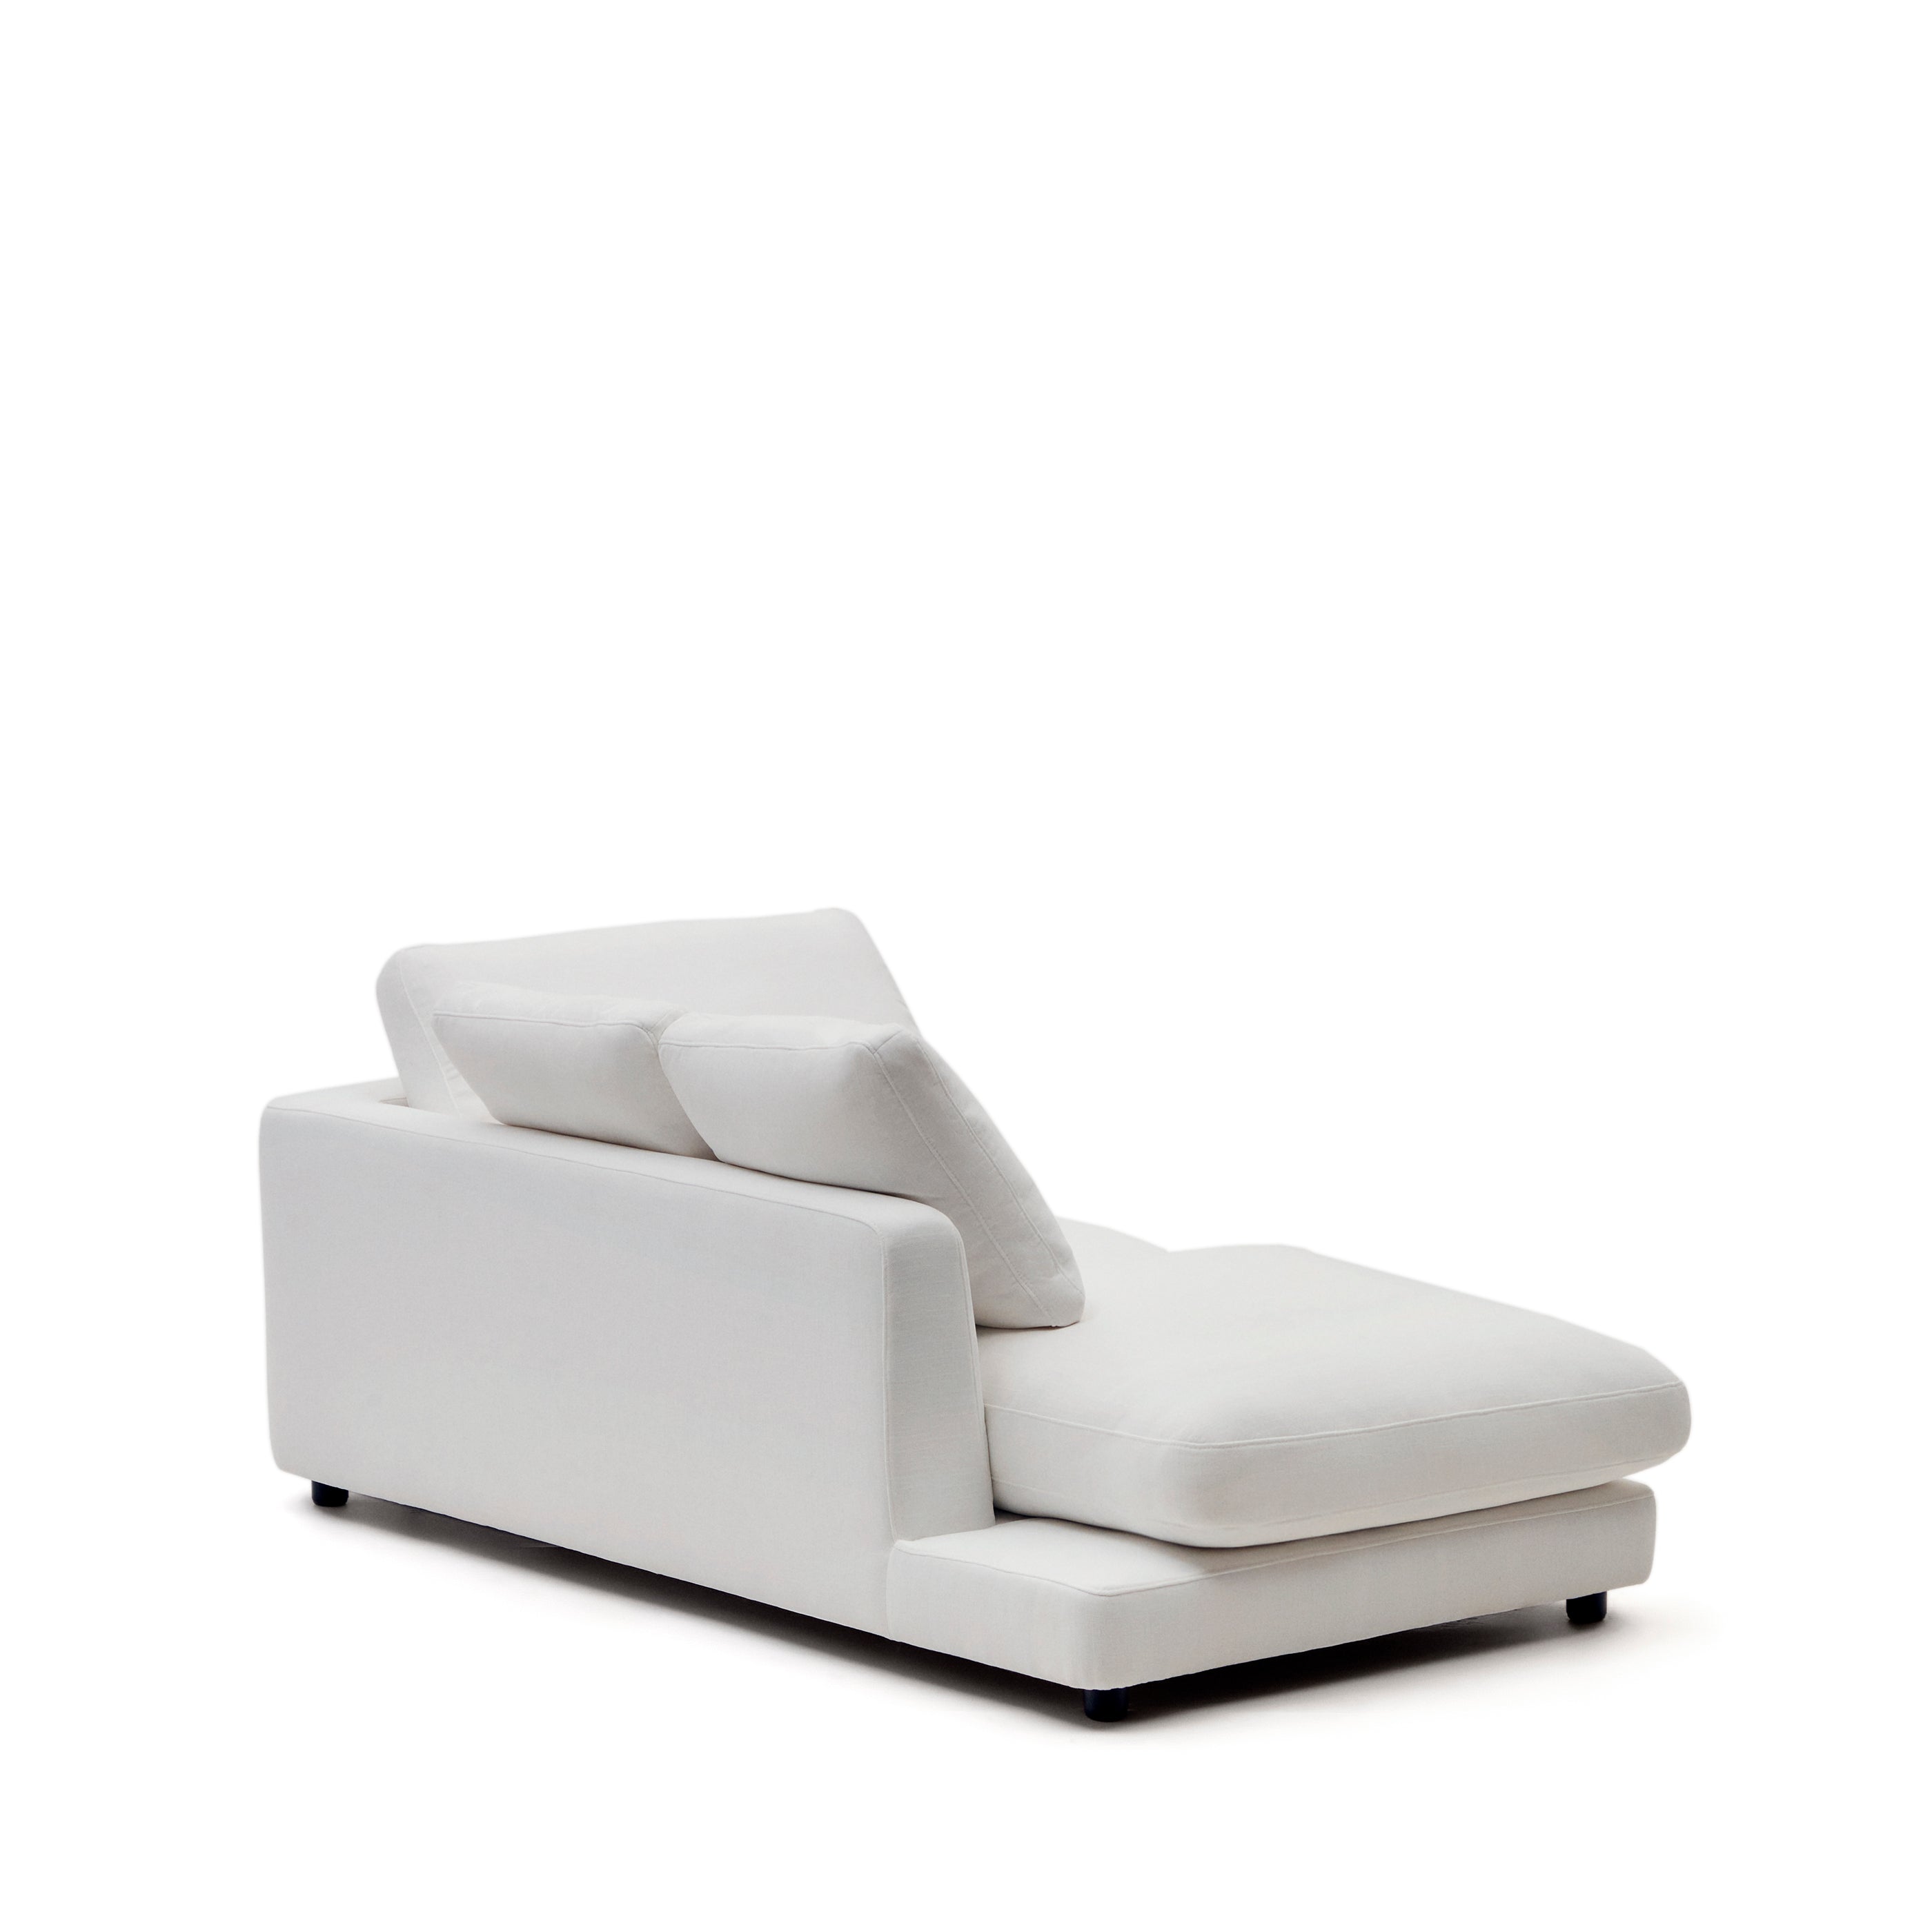 Gala left chaise longue in white, 193 x 105 cm